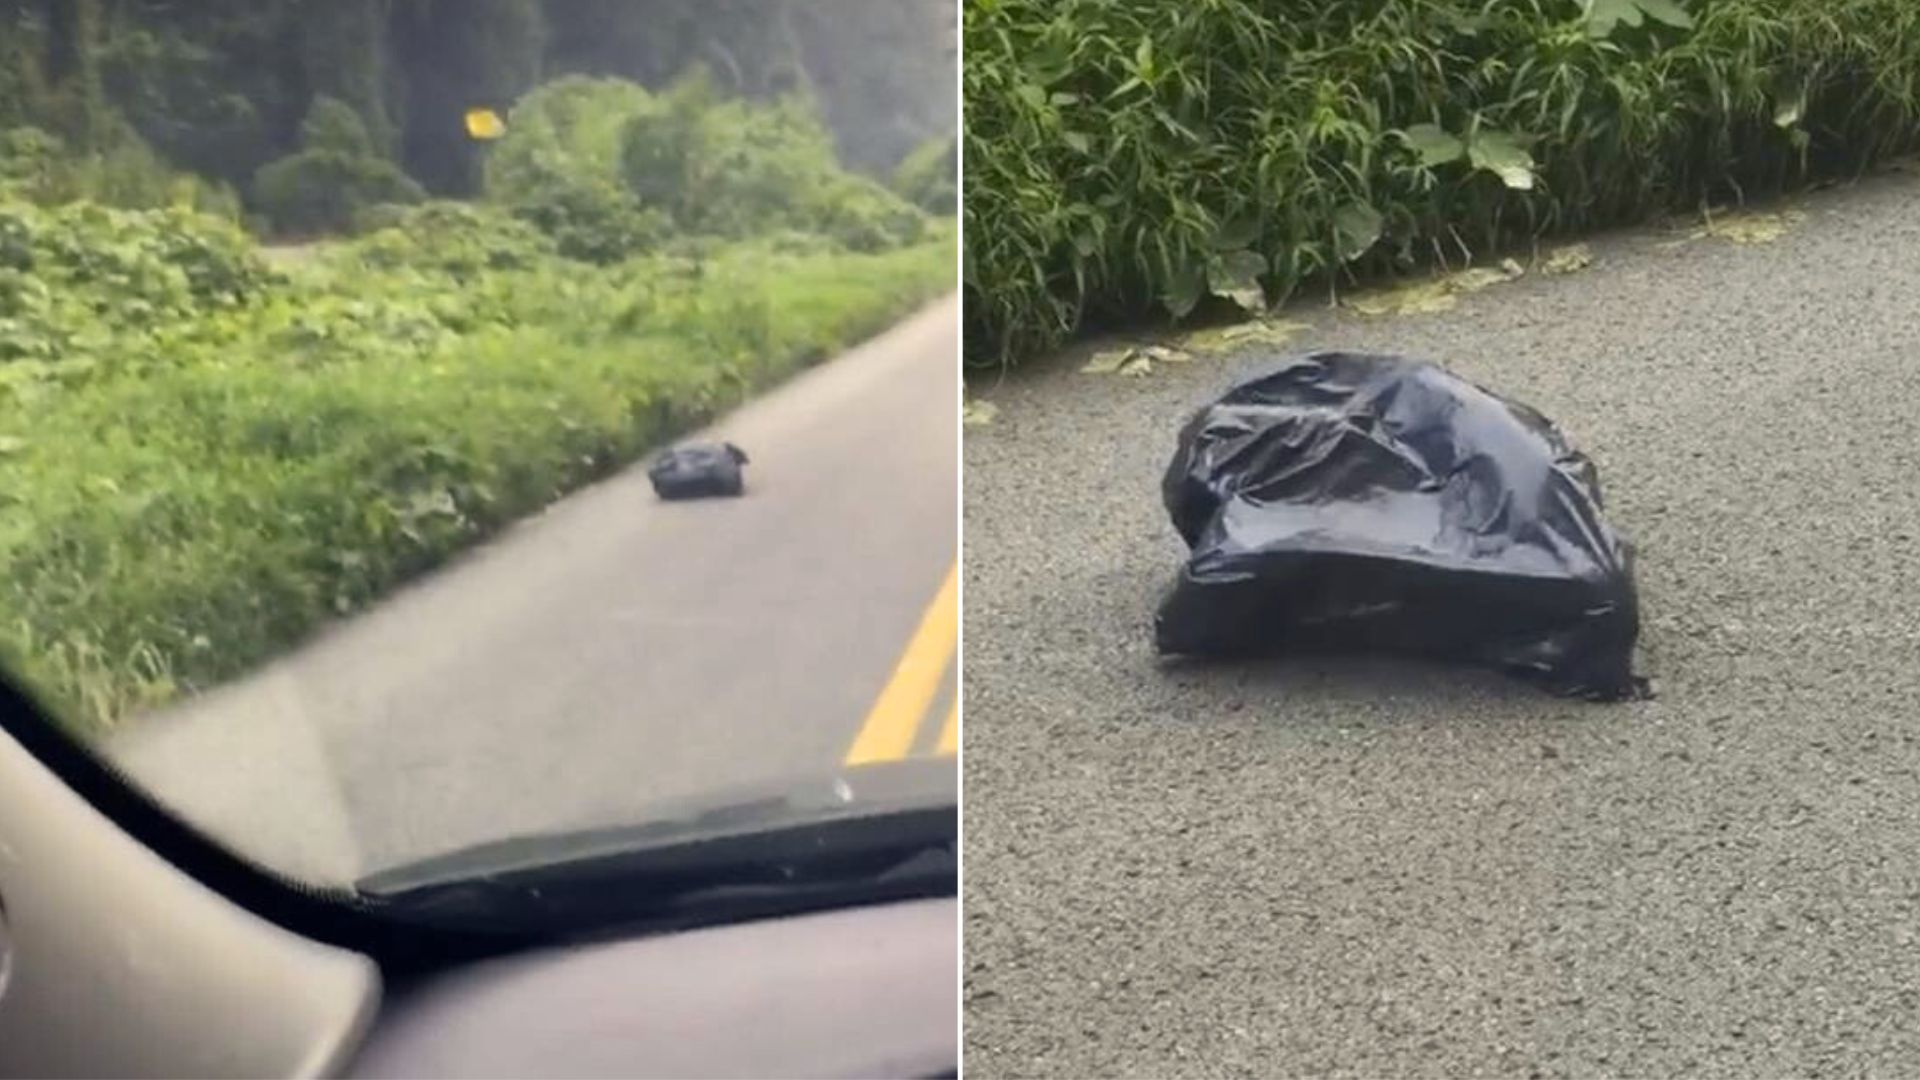 Woman Driving To Work Shocked To Find A Trash Bag Moving In The Road